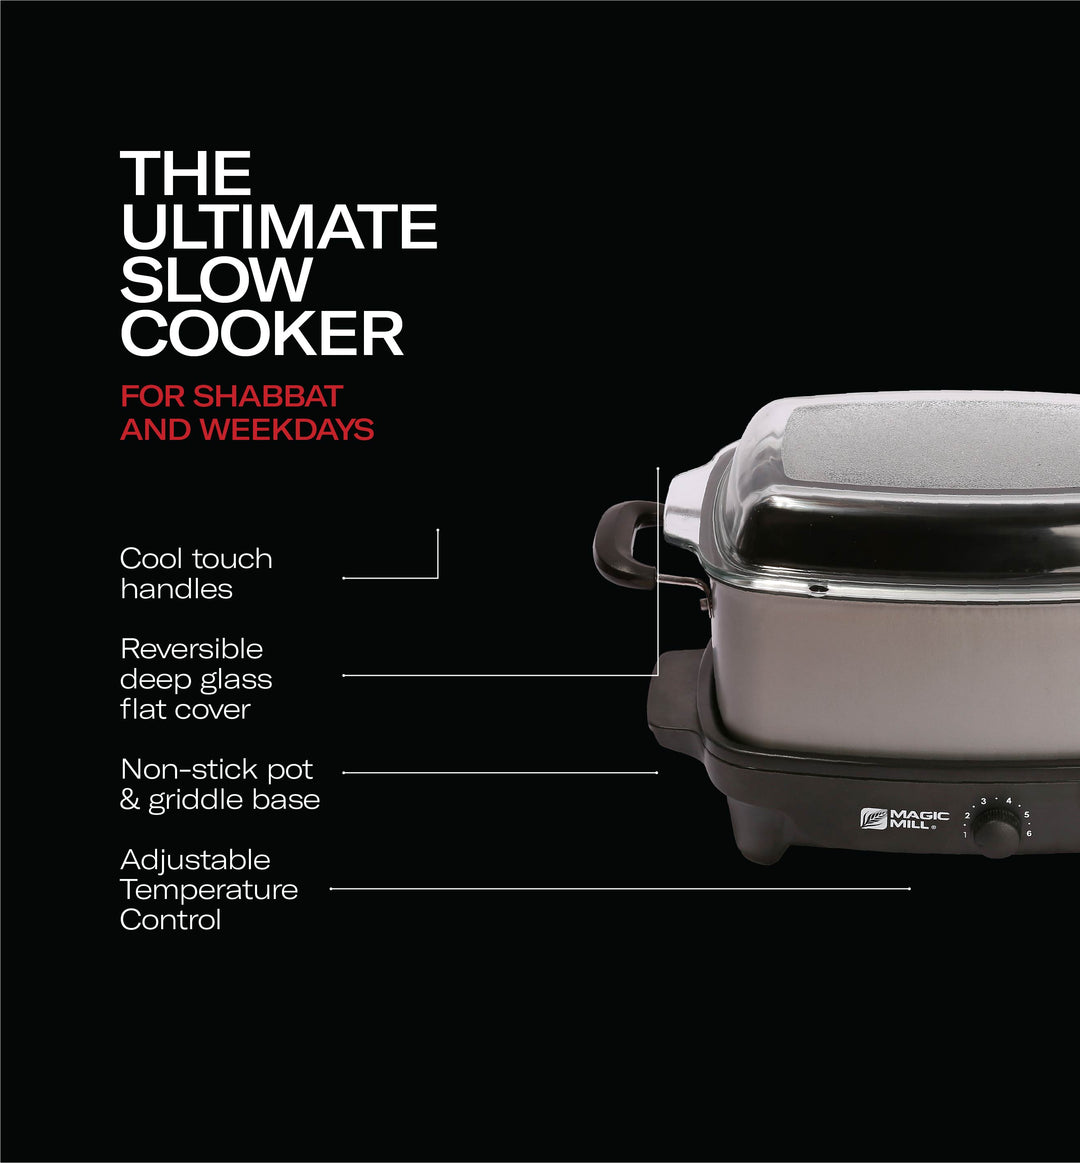 MAGIC MILL 6 QT GRAY SLOW COOKER WITH FLAT GLASS COVER AND COOL TOUCH –  Royaluxkitchen